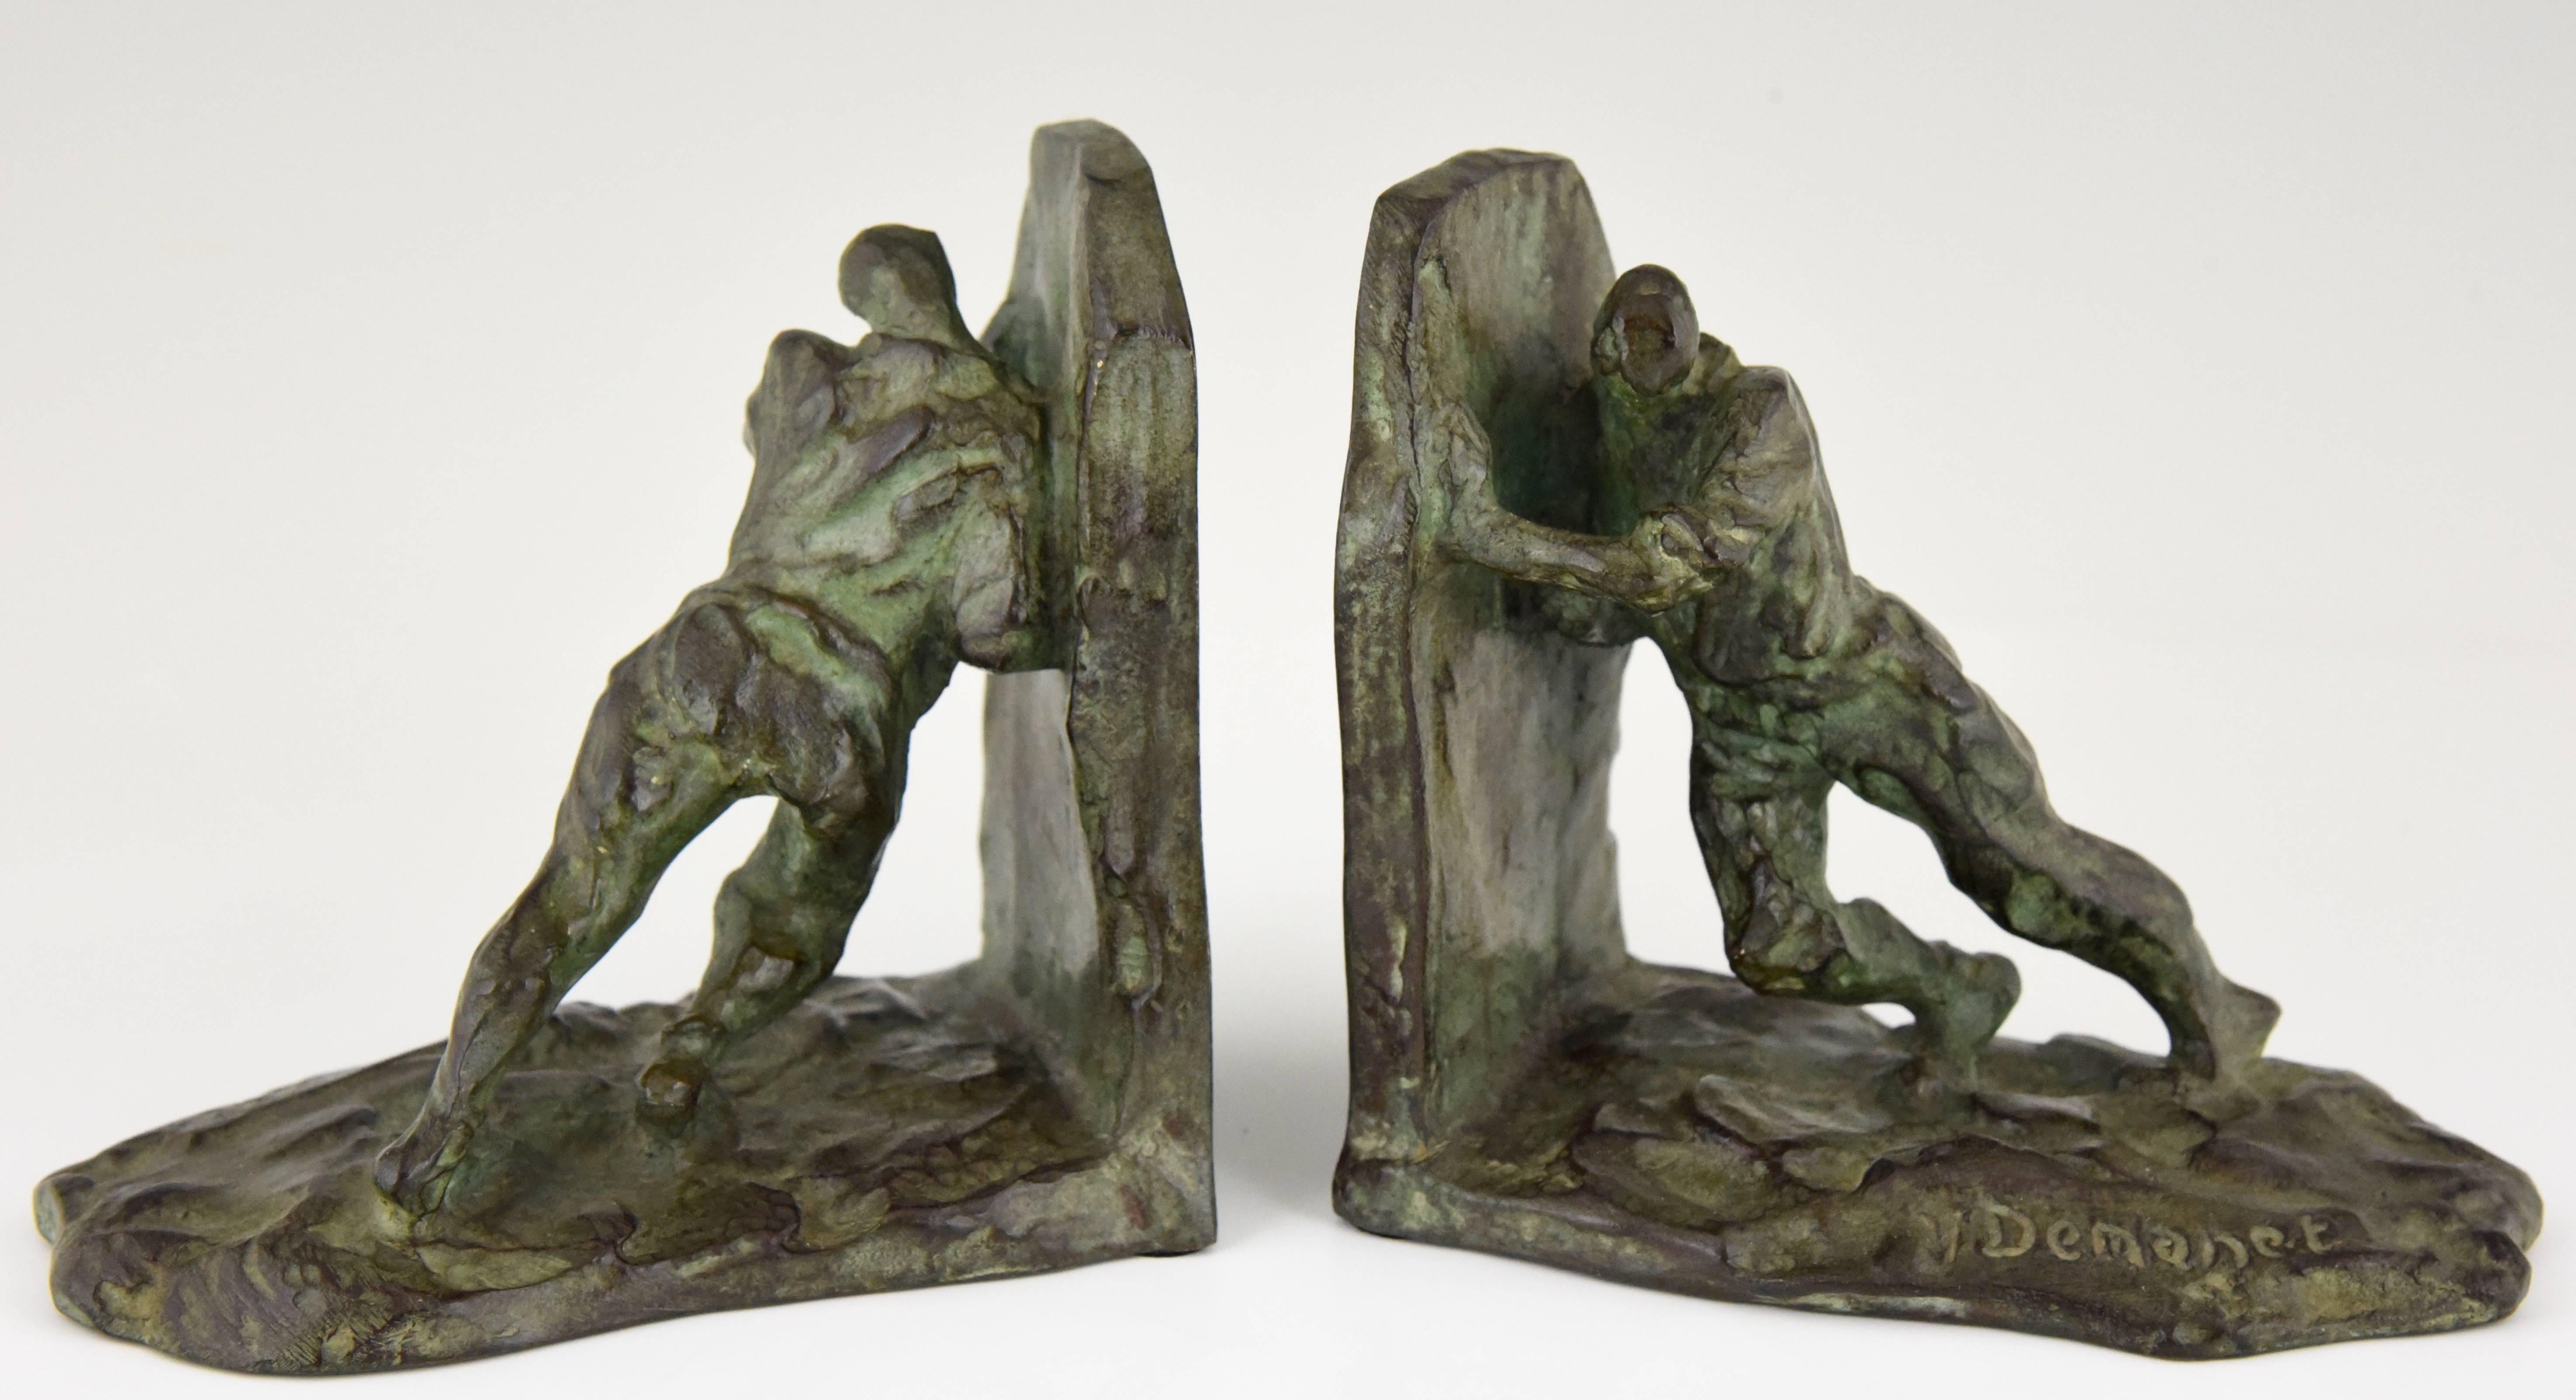 Powerful Art Deco bronze bookends with pushing men by Victor Demanet

Artist/ maker: Victor Demanet
Signature/ marks: V. Demanet. Bronze, France.
Style: Art Deco
Date: 1930
Material: Bronze with dark green patina.
Origin: French artist,